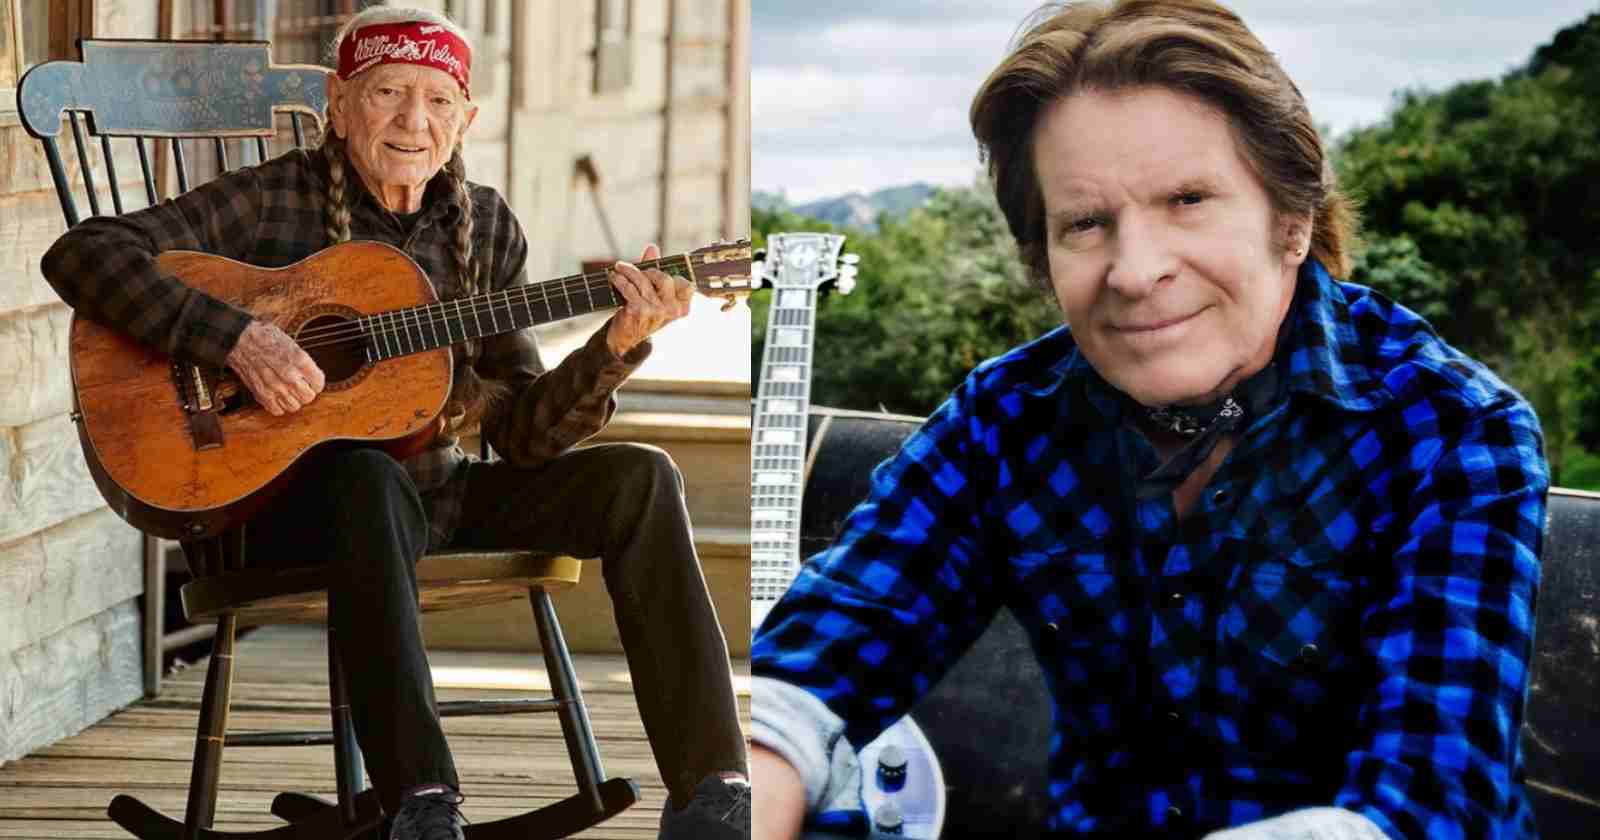 Robert Plant and John Fogerty will be Willie Nelson's opening acts